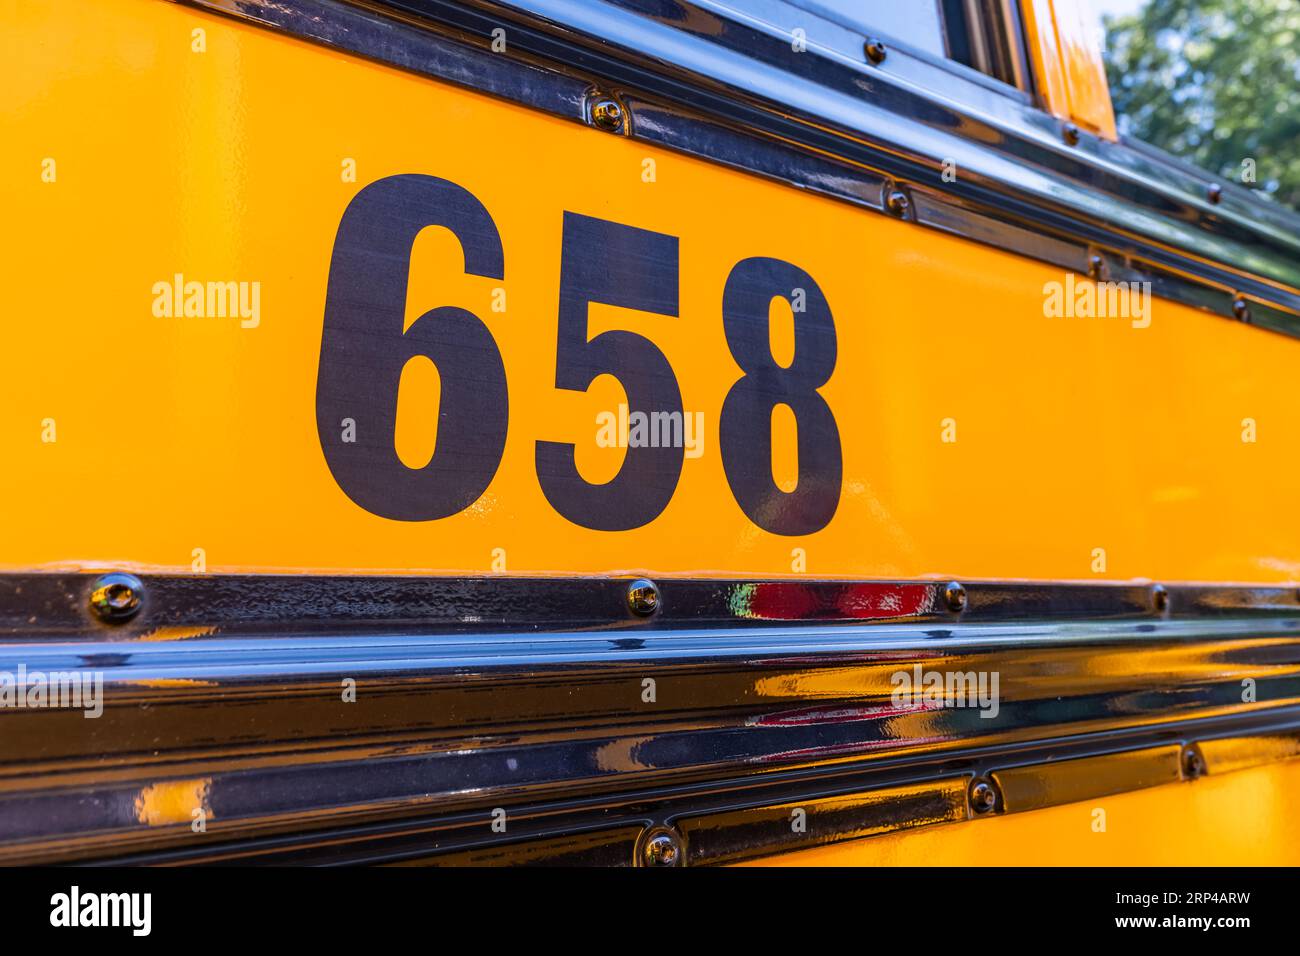 Side of a parked yellow school bus number 658 Stock Photo